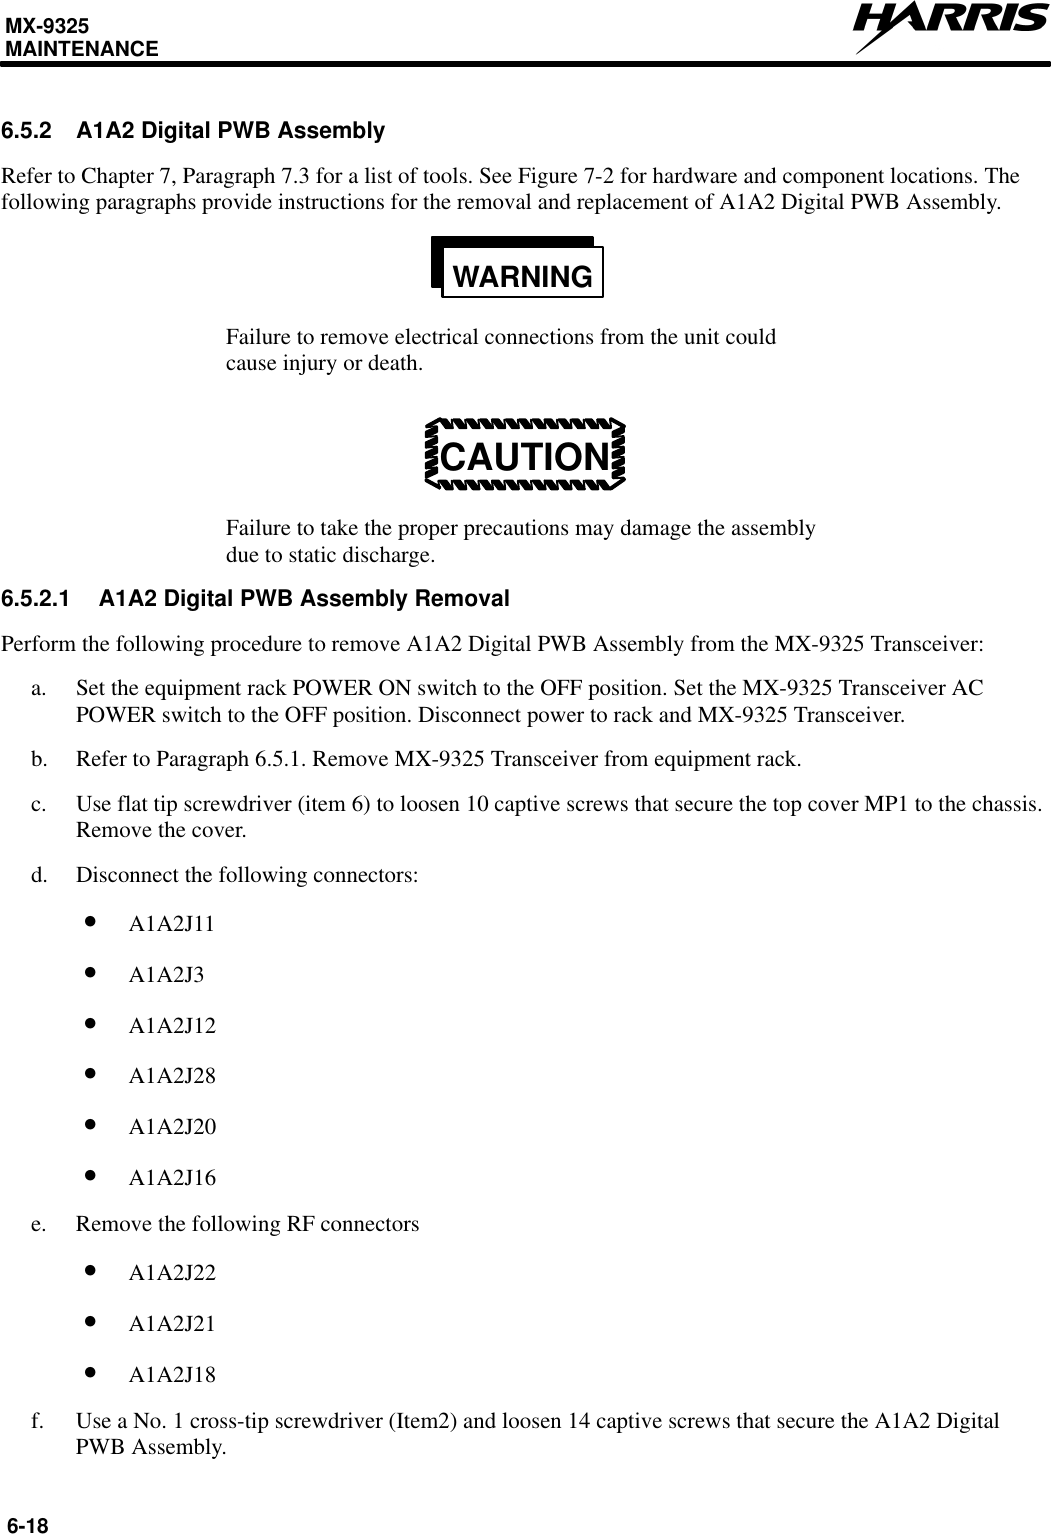 MX-9325MAINTENANCE6-186.5.2 A1A2 Digital PWB AssemblyRefer to Chapter 7, Paragraph 7.3 for a list of tools. See Figure 7-2 for hardware and component locations. Thefollowing paragraphs provide instructions for the removal and replacement of A1A2 Digital PWB Assembly.WARNINGFailure to remove electrical connections from the unit couldcause injury or death.CAUTIONFailure to take the proper precautions may damage the assemblydue to static discharge.6.5.2.1 A1A2 Digital PWB Assembly RemovalPerform the following procedure to remove A1A2 Digital PWB Assembly from the MX-9325 Transceiver:a. Set the equipment rack POWER ON switch to the OFF position. Set the MX-9325 Transceiver ACPOWER switch to the OFF position. Disconnect power to rack and MX-9325 Transceiver.b. Refer to Paragraph 6.5.1. Remove MX-9325 Transceiver from equipment rack.c. Use flat tip screwdriver (item 6) to loosen 10 captive screws that secure the top cover MP1 to the chassis.Remove the cover.d. Disconnect the following connectors:•A1A2J11•A1A2J3•A1A2J12•A1A2J28•A1A2J20•A1A2J16e. Remove the following RF connectors•A1A2J22•A1A2J21•A1A2J18f. Use a No. 1 cross-tip screwdriver (Item2) and loosen 14 captive screws that secure the A1A2 DigitalPWB Assembly.